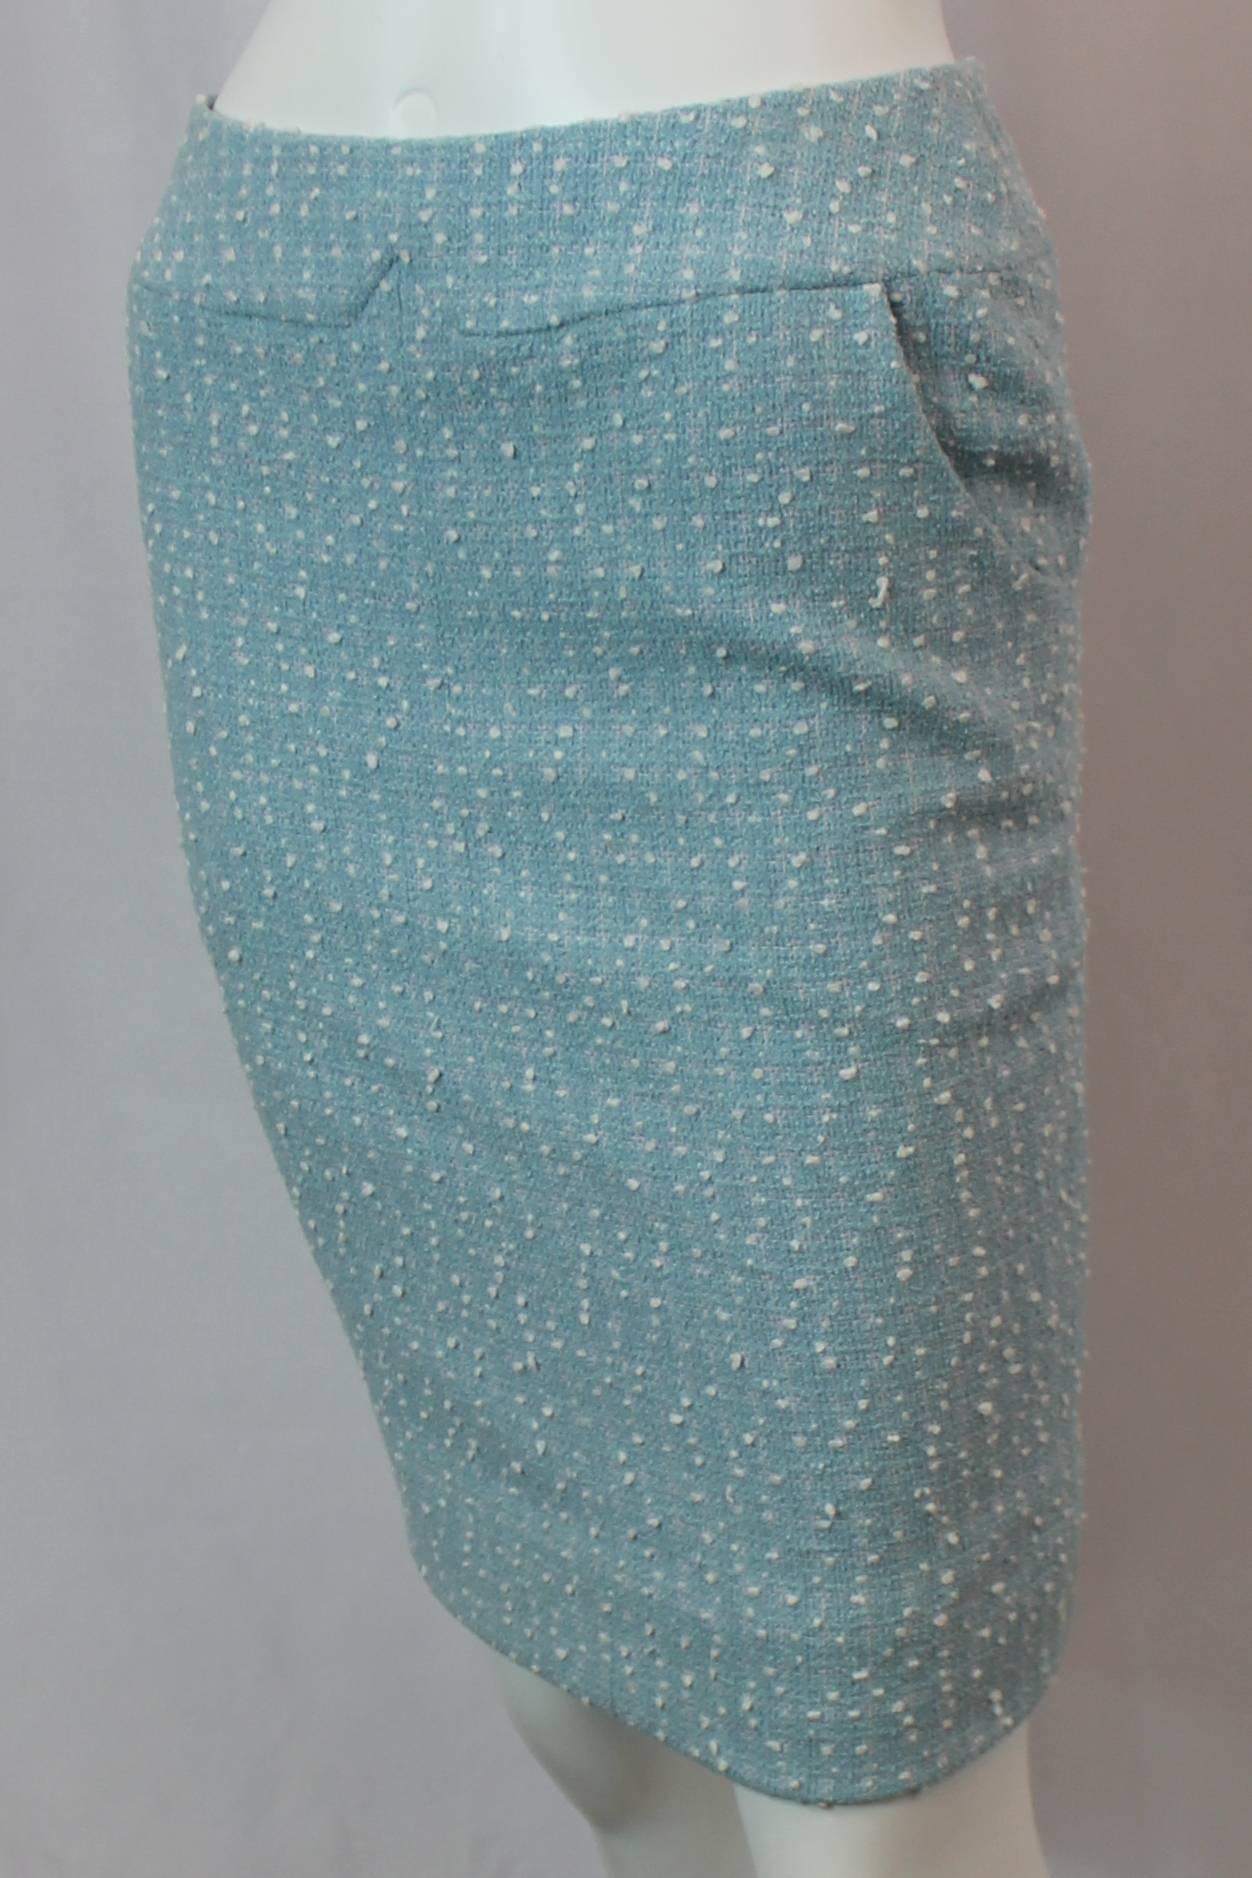 Chanel Light Blue Tweed Tapered Wool Blend Skirt - 38 - 1900's. This beautiful skirt is a light blue color with white balls of string on the tweed. It is made of a wool / cotton / nylon blend. There are 2 front pockets and a tapered structure. A